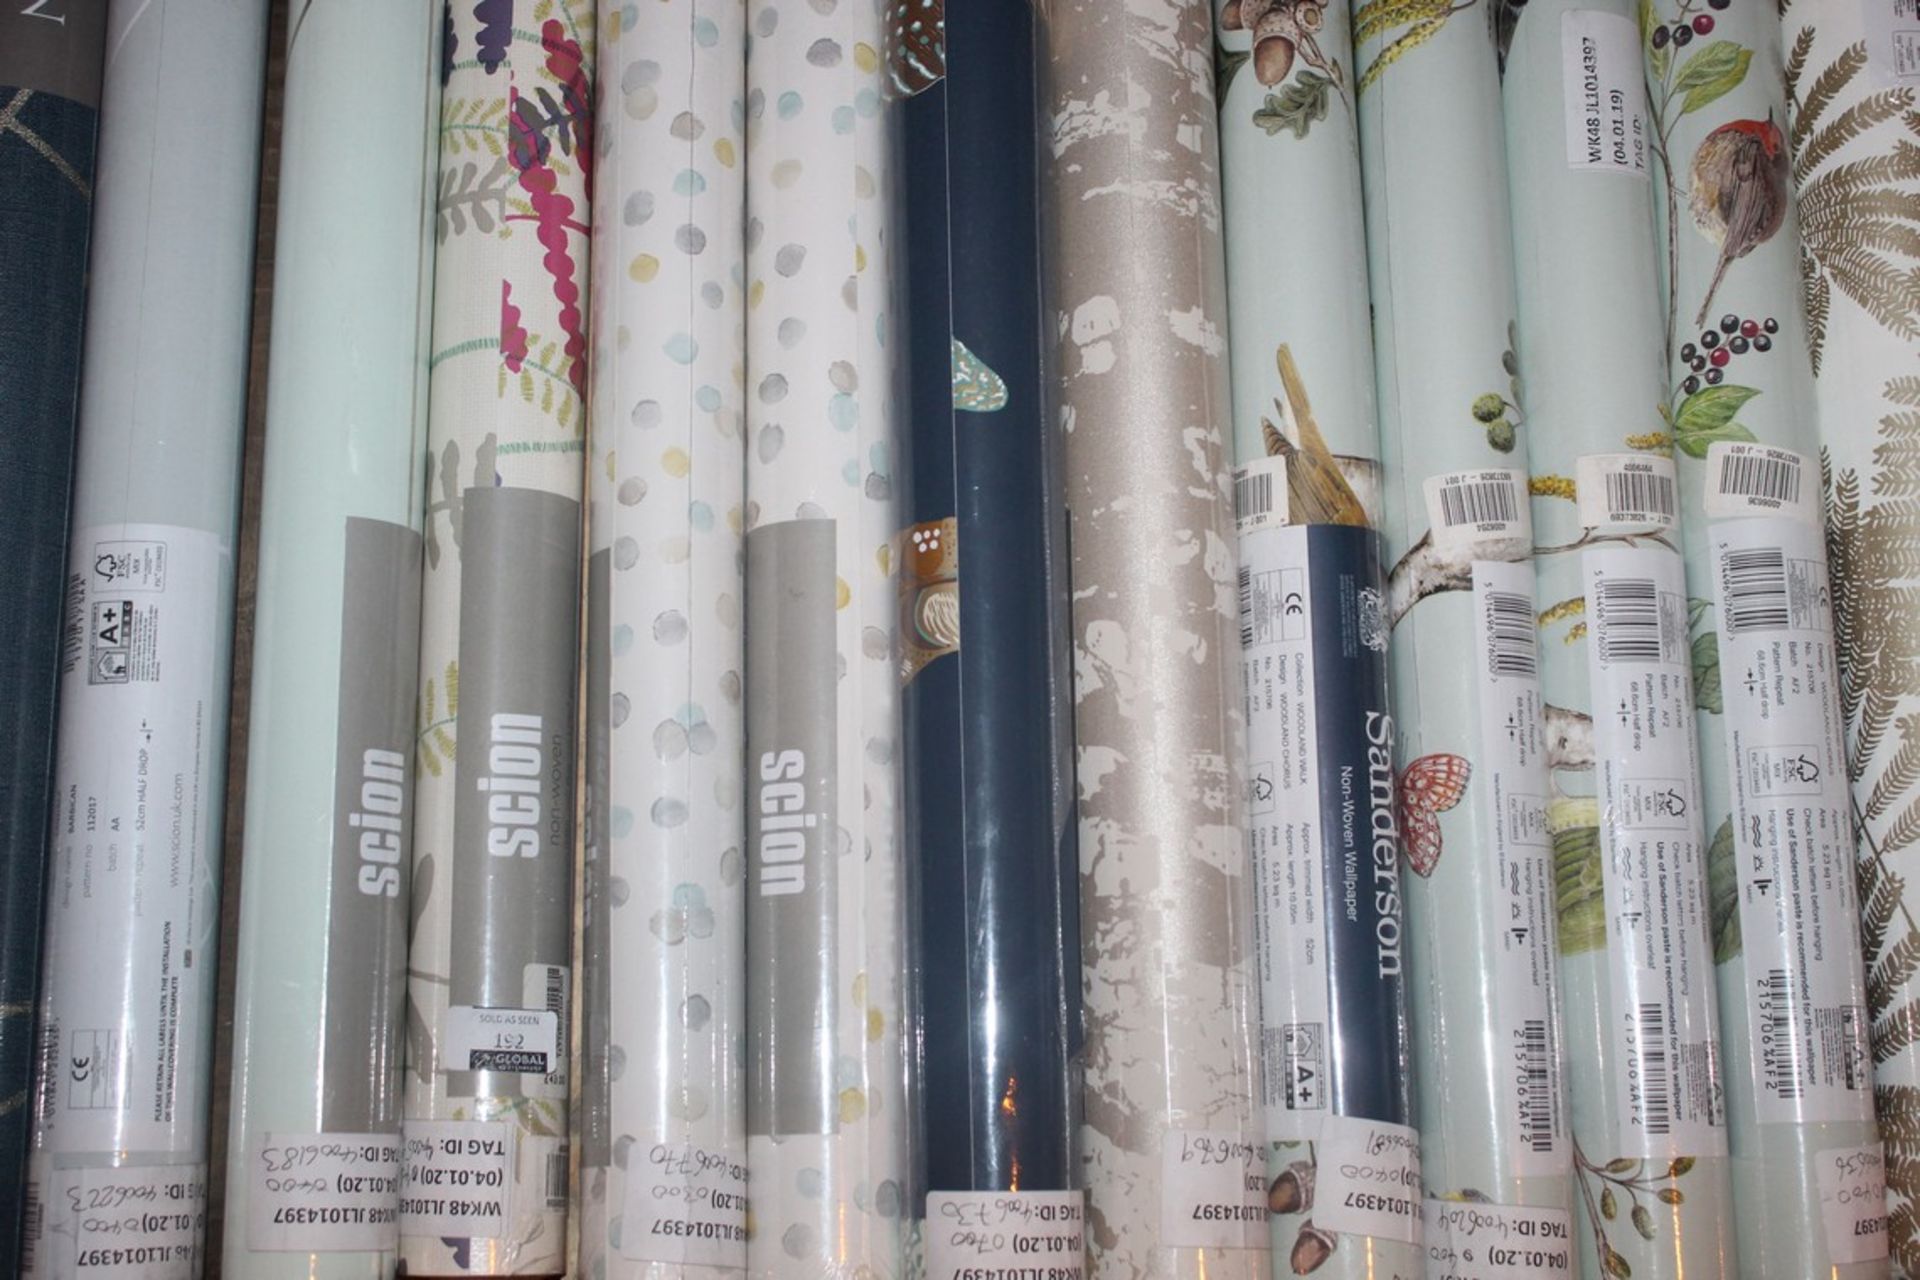 Lot To Contain 17 Assorted Rolls Of Wallpaper By Clarissa Hulse, Sanderson, Harlequin, Scion, And